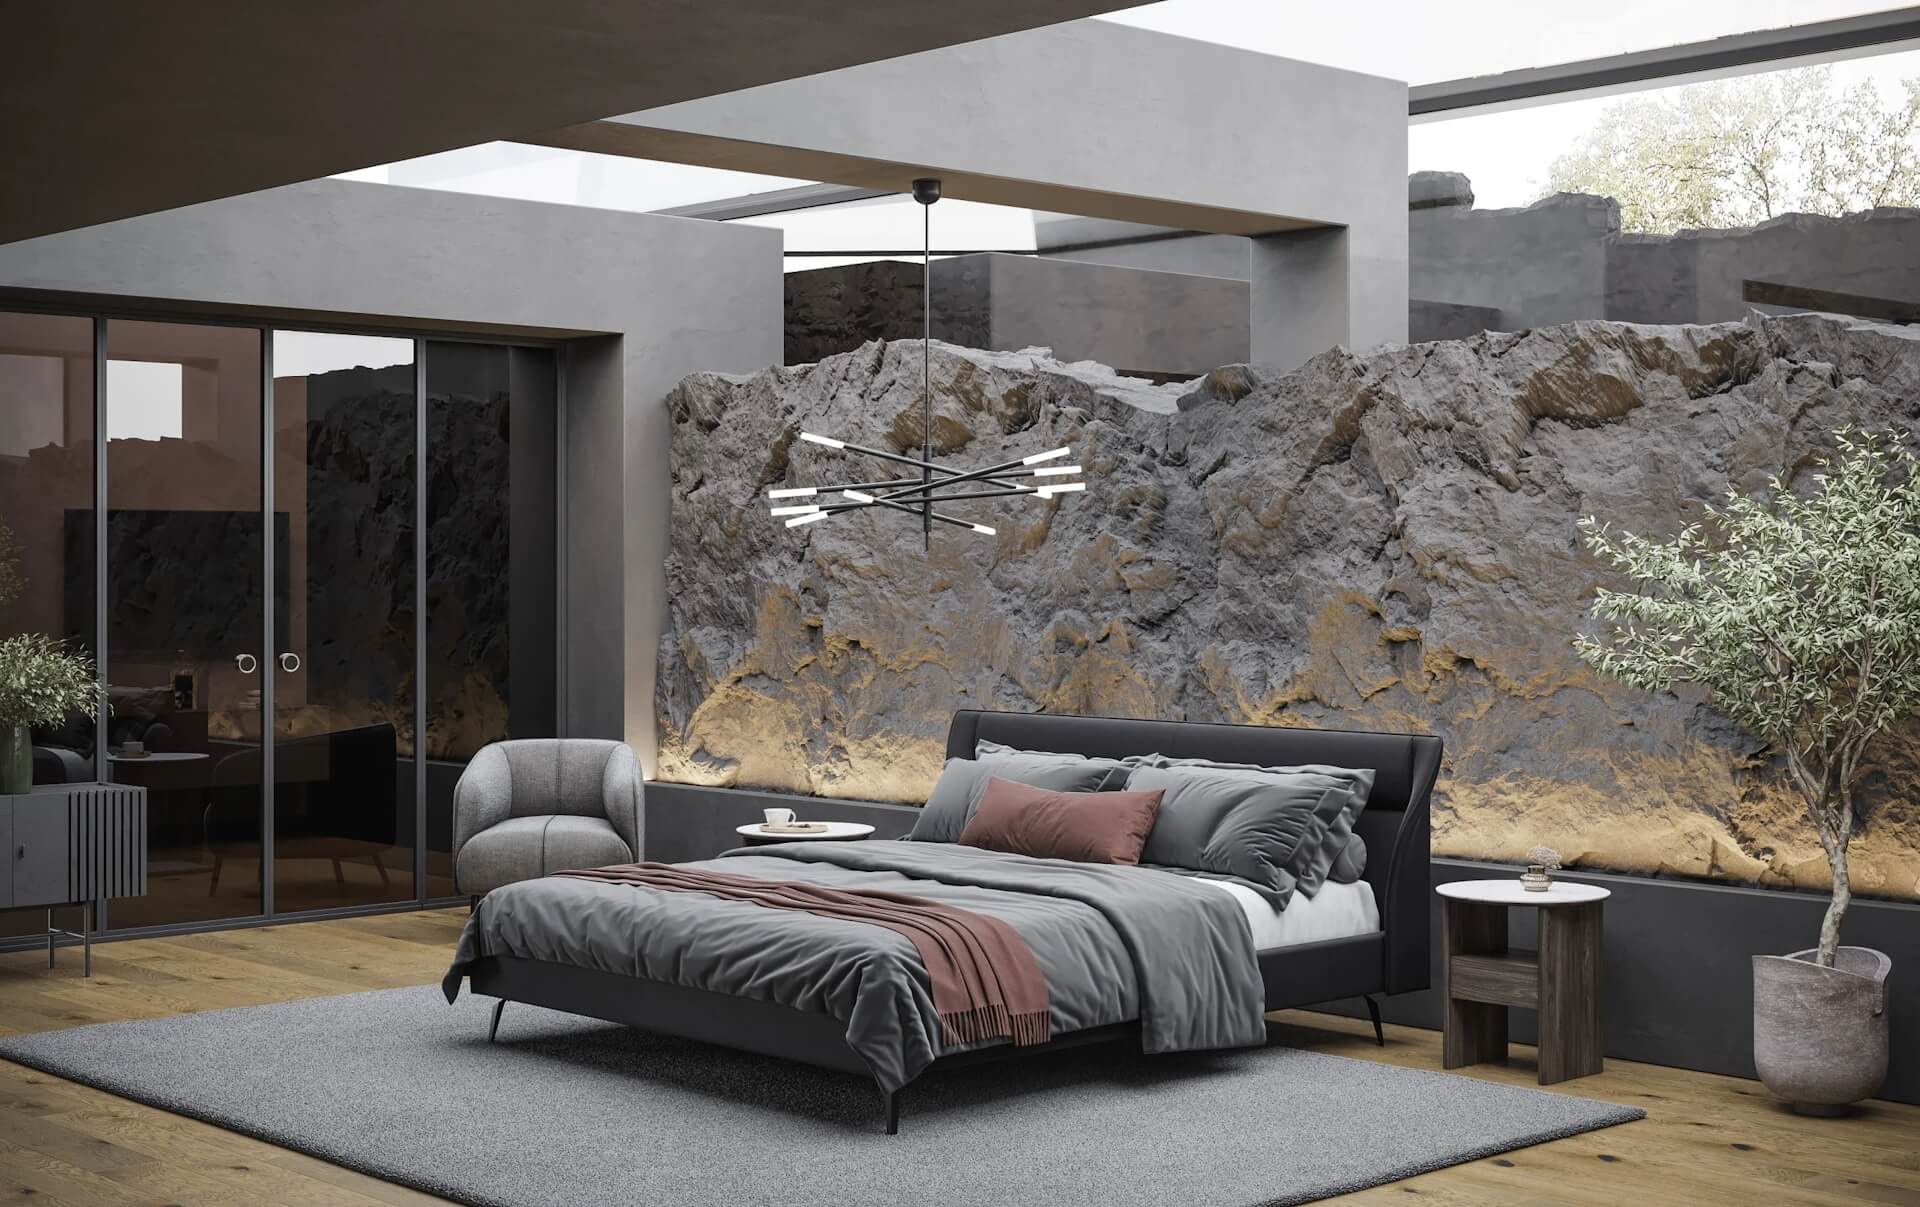 Lifestyle Bedroom Image: Incorporating Finishes 3D Rendering